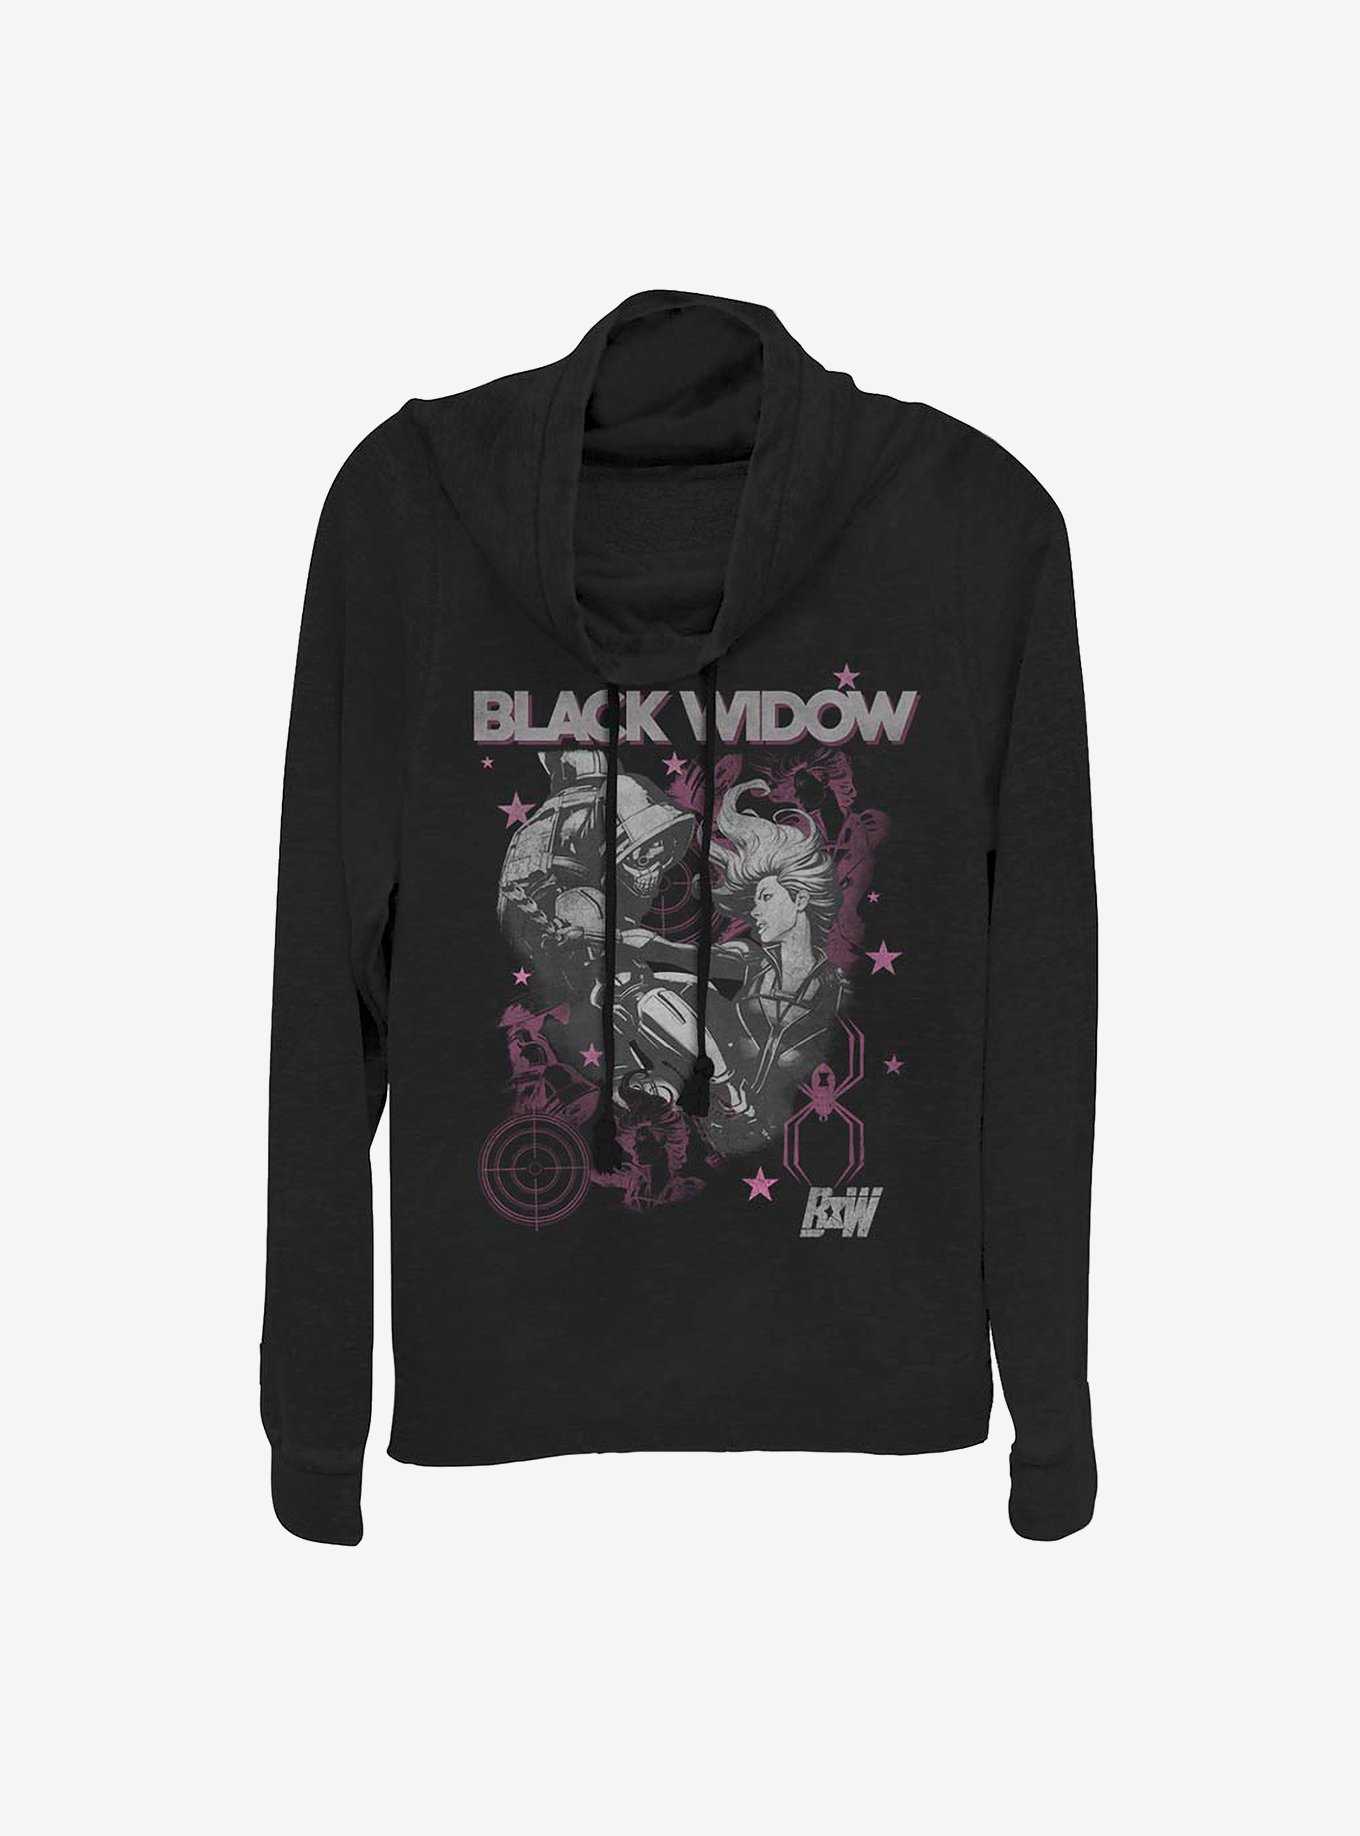 Marvel Black Widow Black And White Poster Cowlneck Long-Sleeve Girls Top, , hi-res